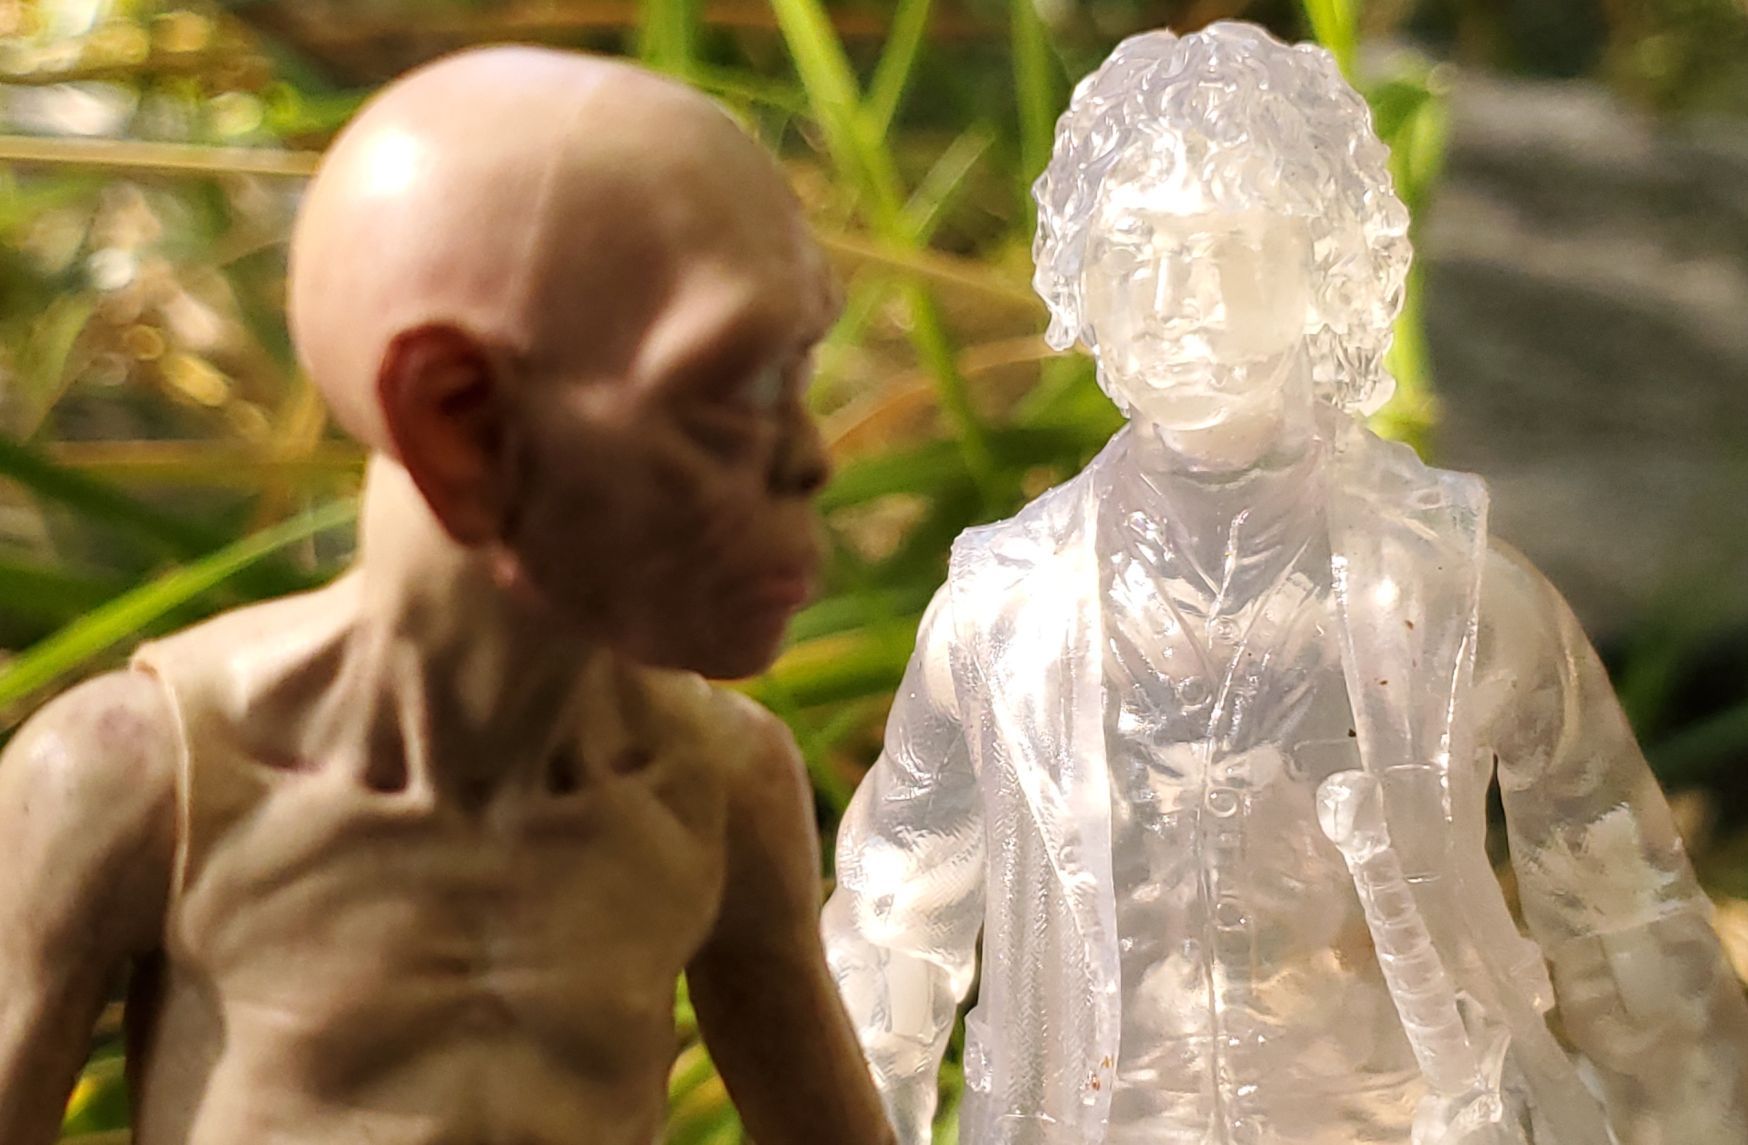 Review: Diamond Select Lord of the Rings Gollum, Deluxe Release